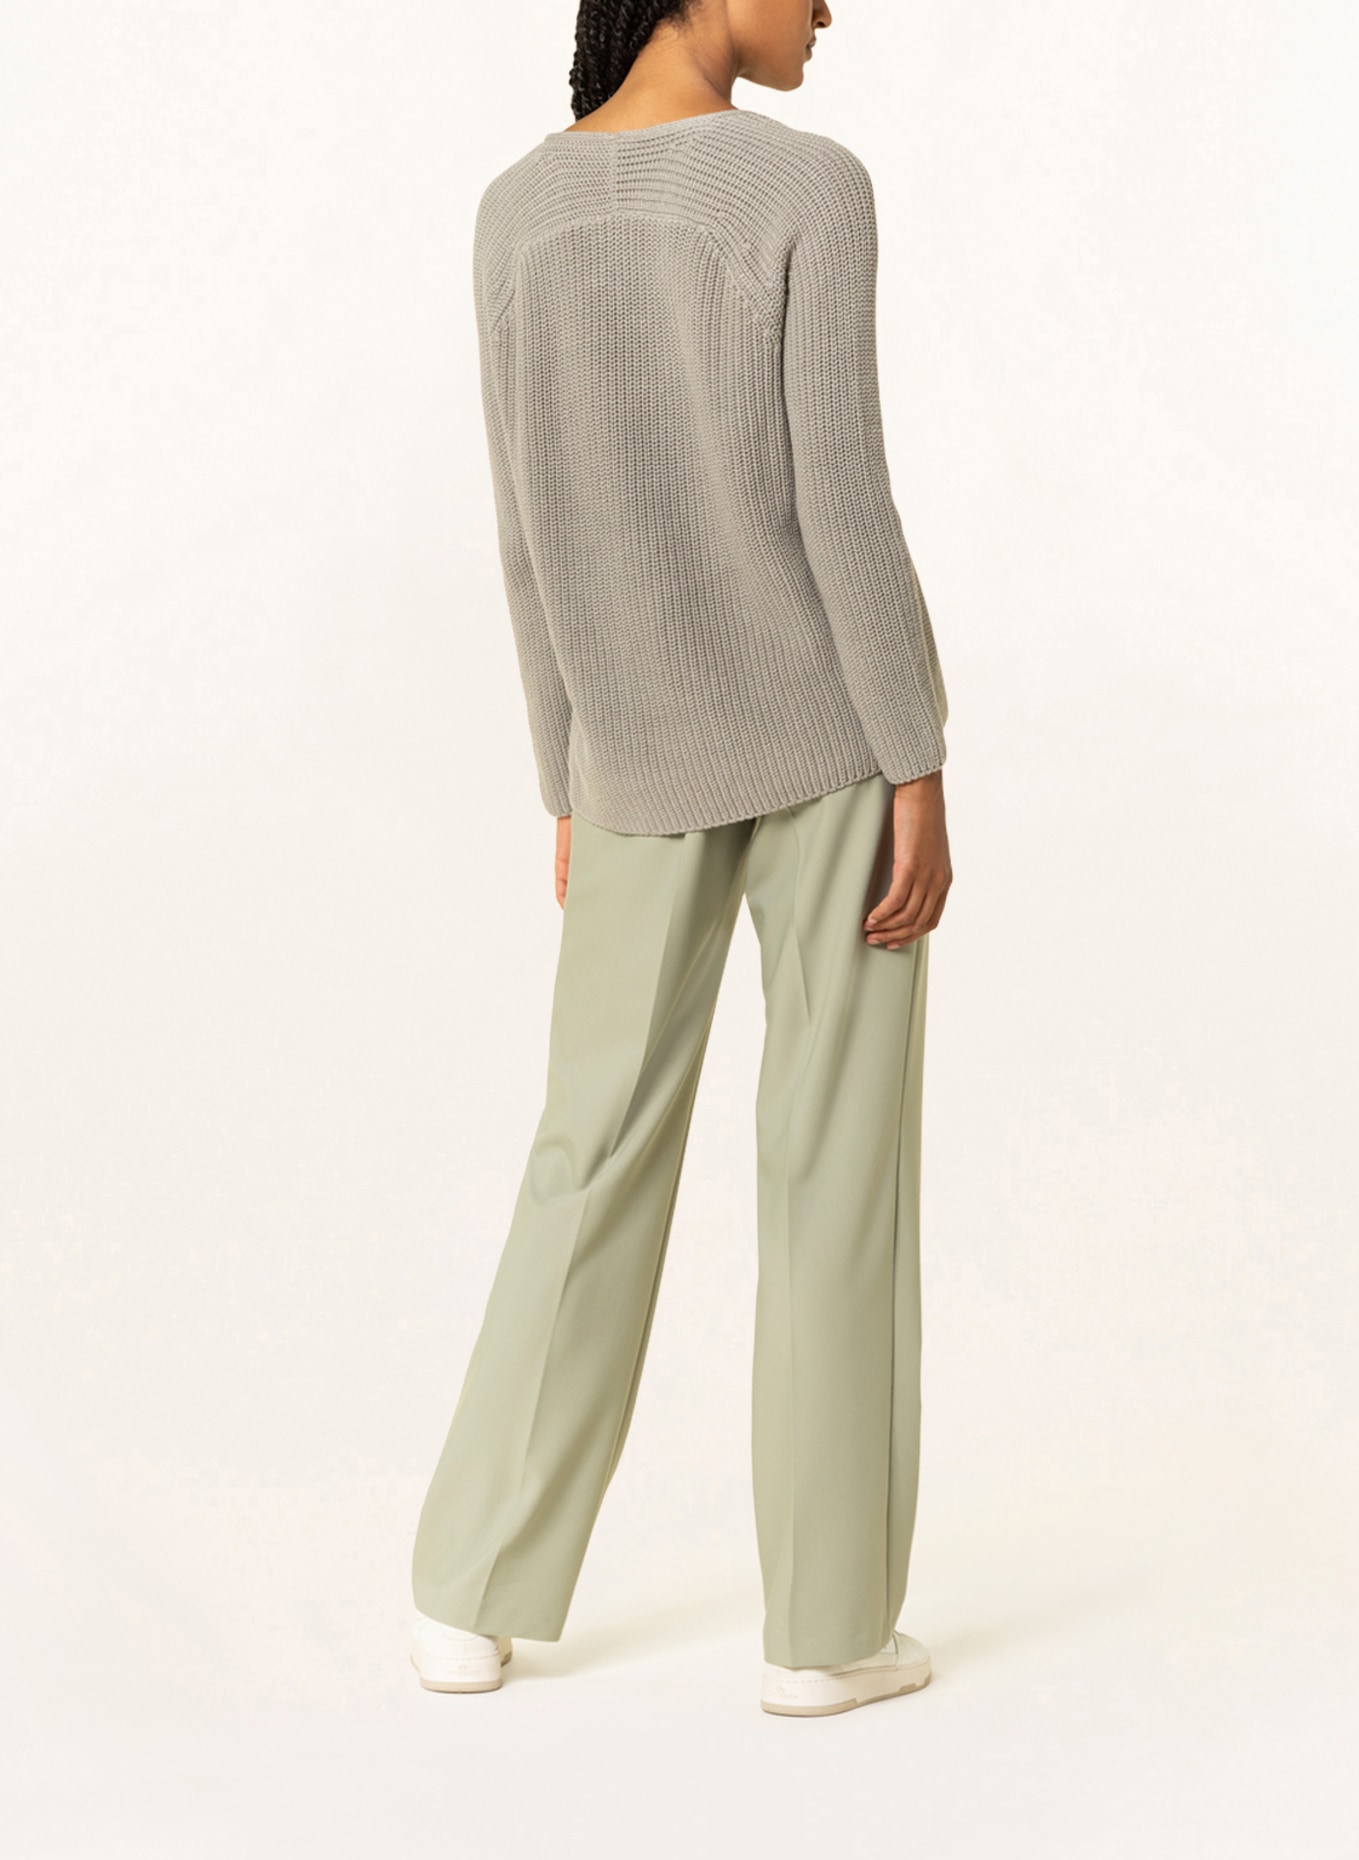 BETTER RICH Sweater, Color: GRAY (Image 3)